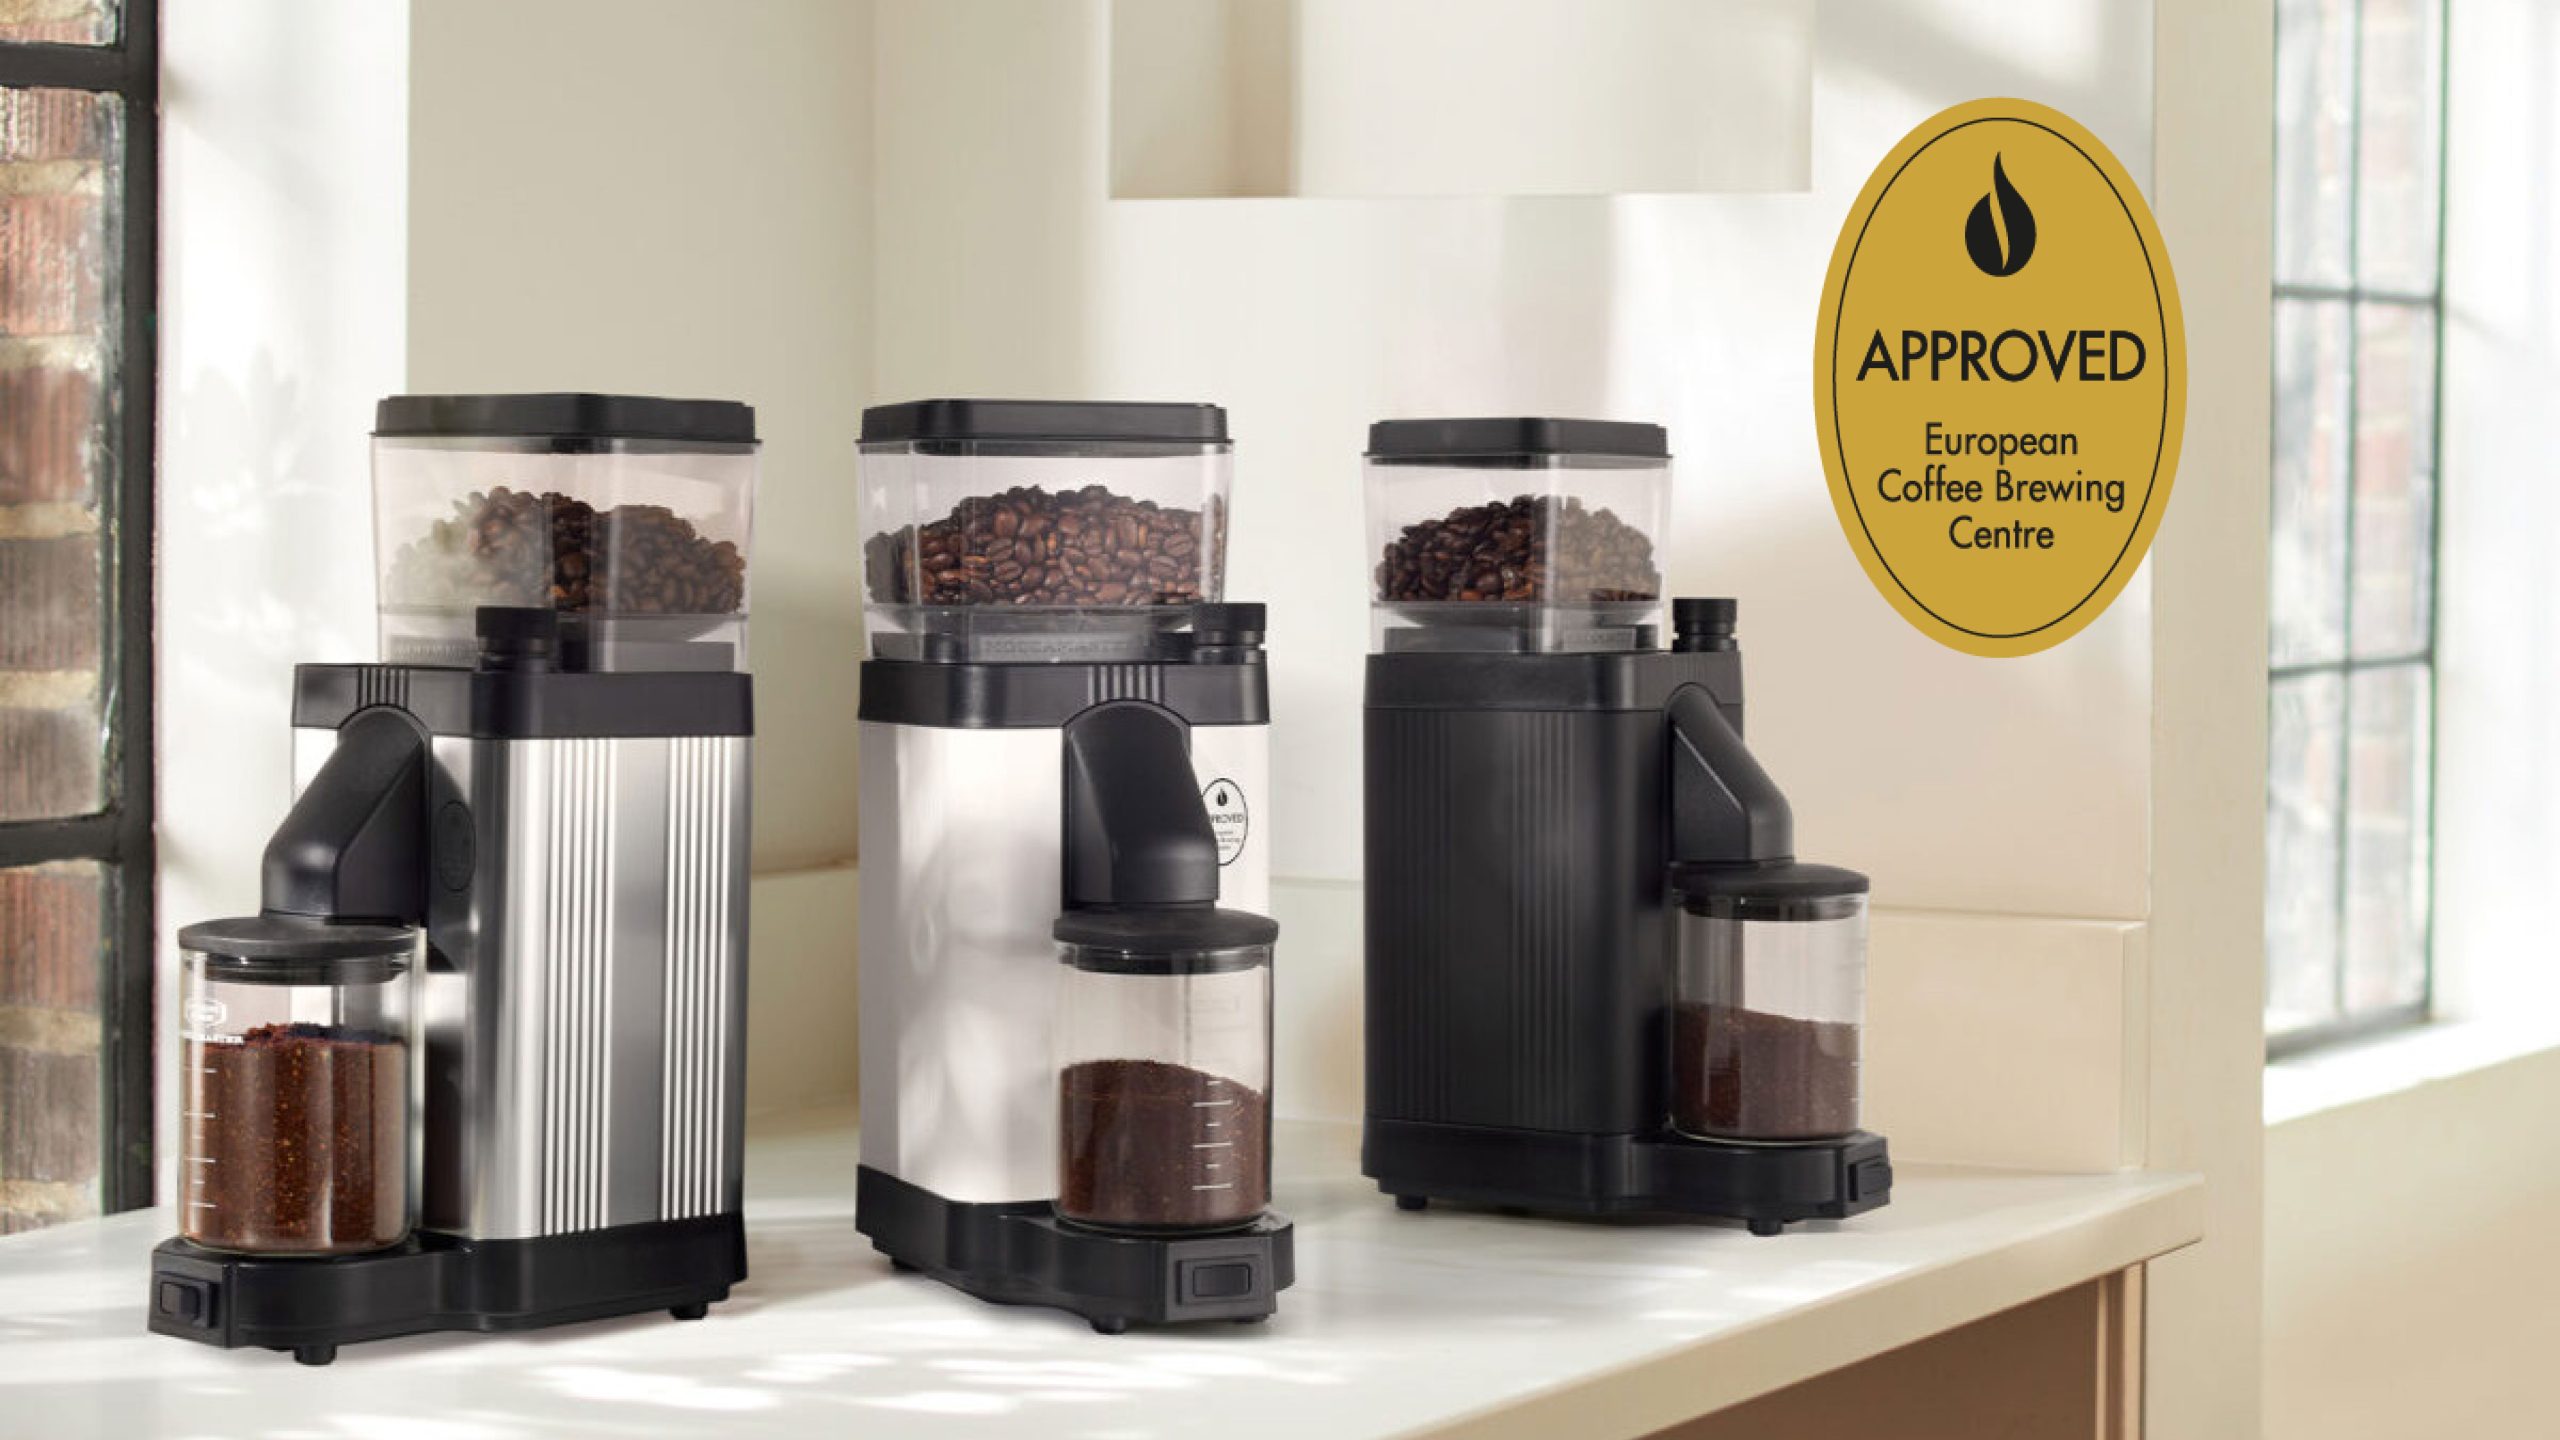 The Moccamaster K5 Grinder is approved by ECBC